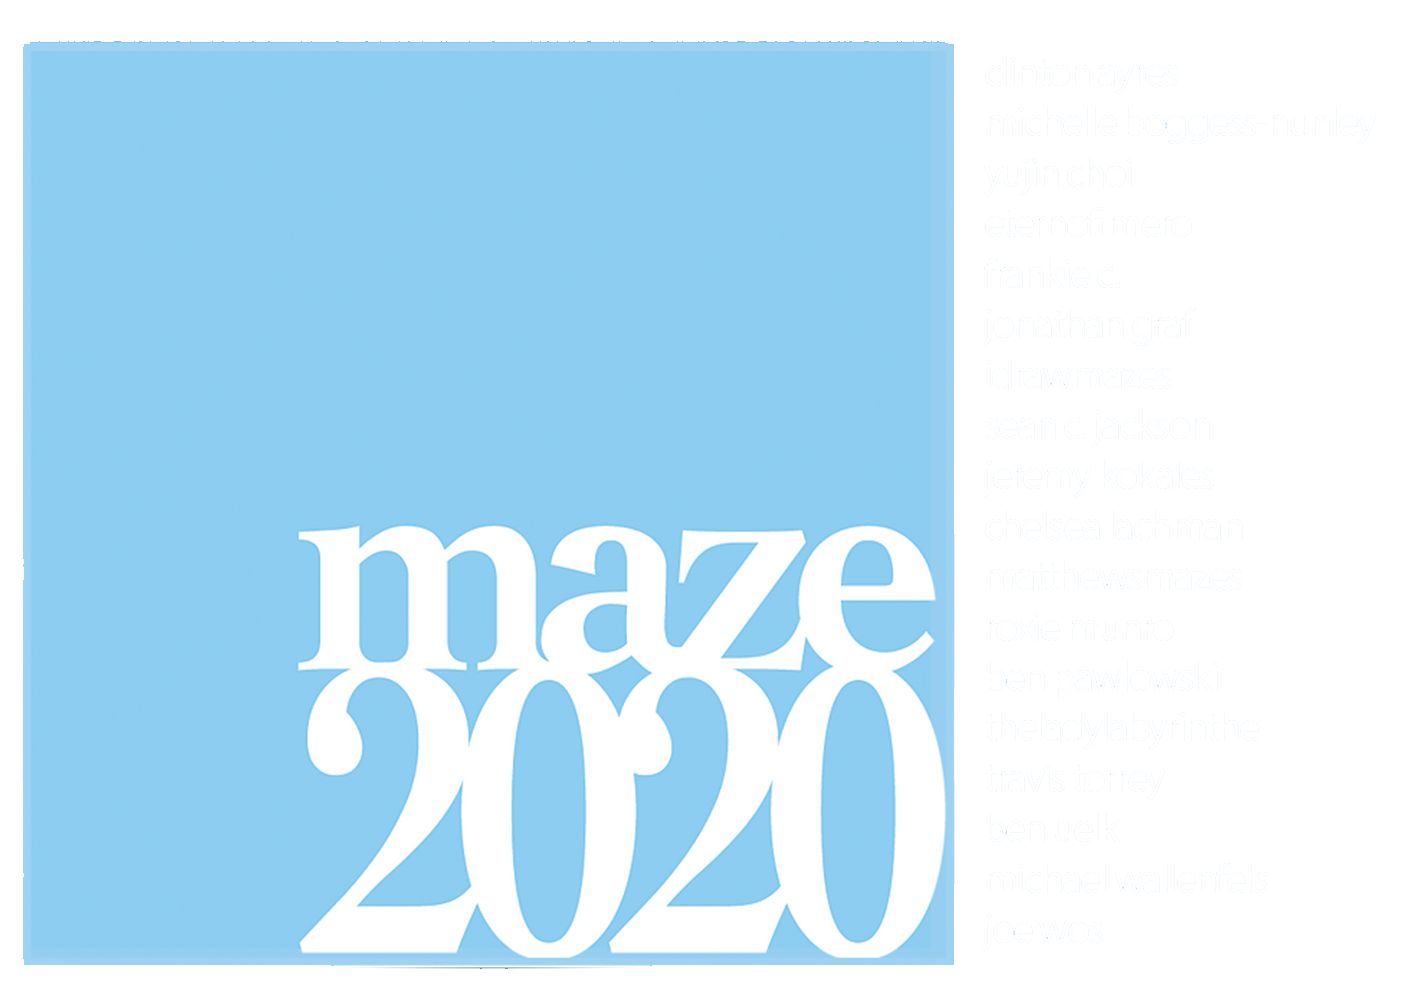 Free download of maze2020.